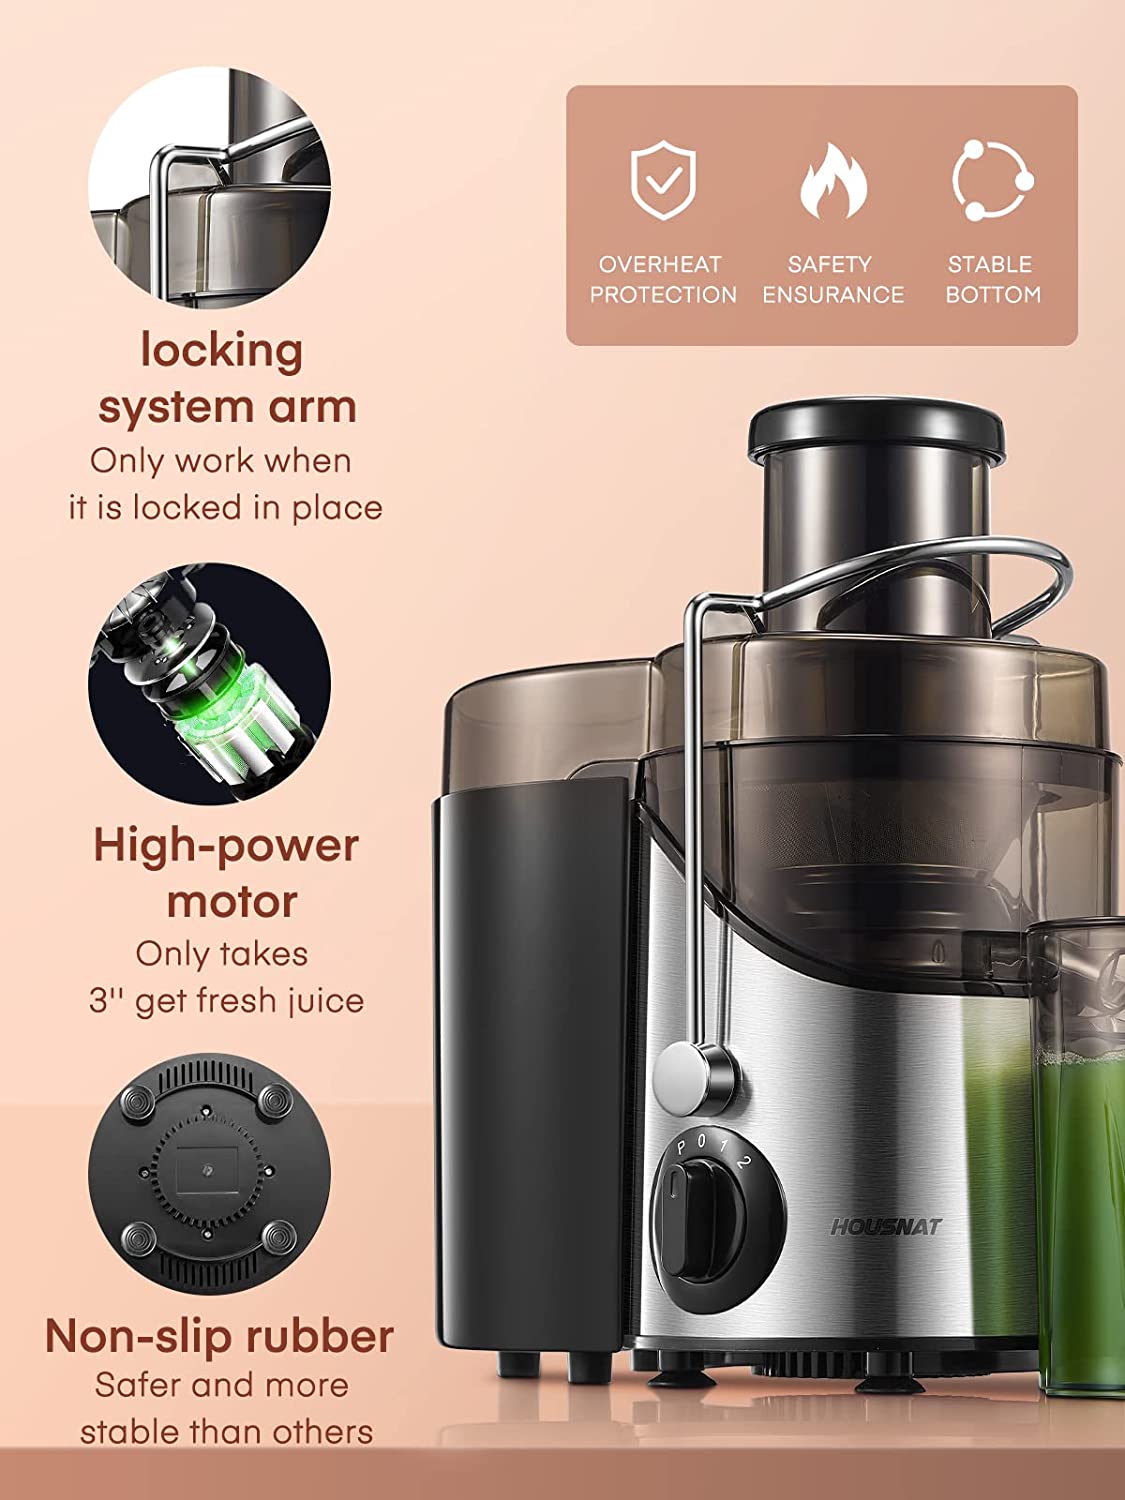 locking system arm, high power motor, non slip rubberm,, Juicer Machine, Juicers Easy to Clean, HOUSNAT Centrifugal Extractor Juicer 3 Speeds with Big Mouth 3" Feed Chute, Juicer Extractor for Fruits & Vegs, Electric Juicer with Anti-Slip, BPA-Free